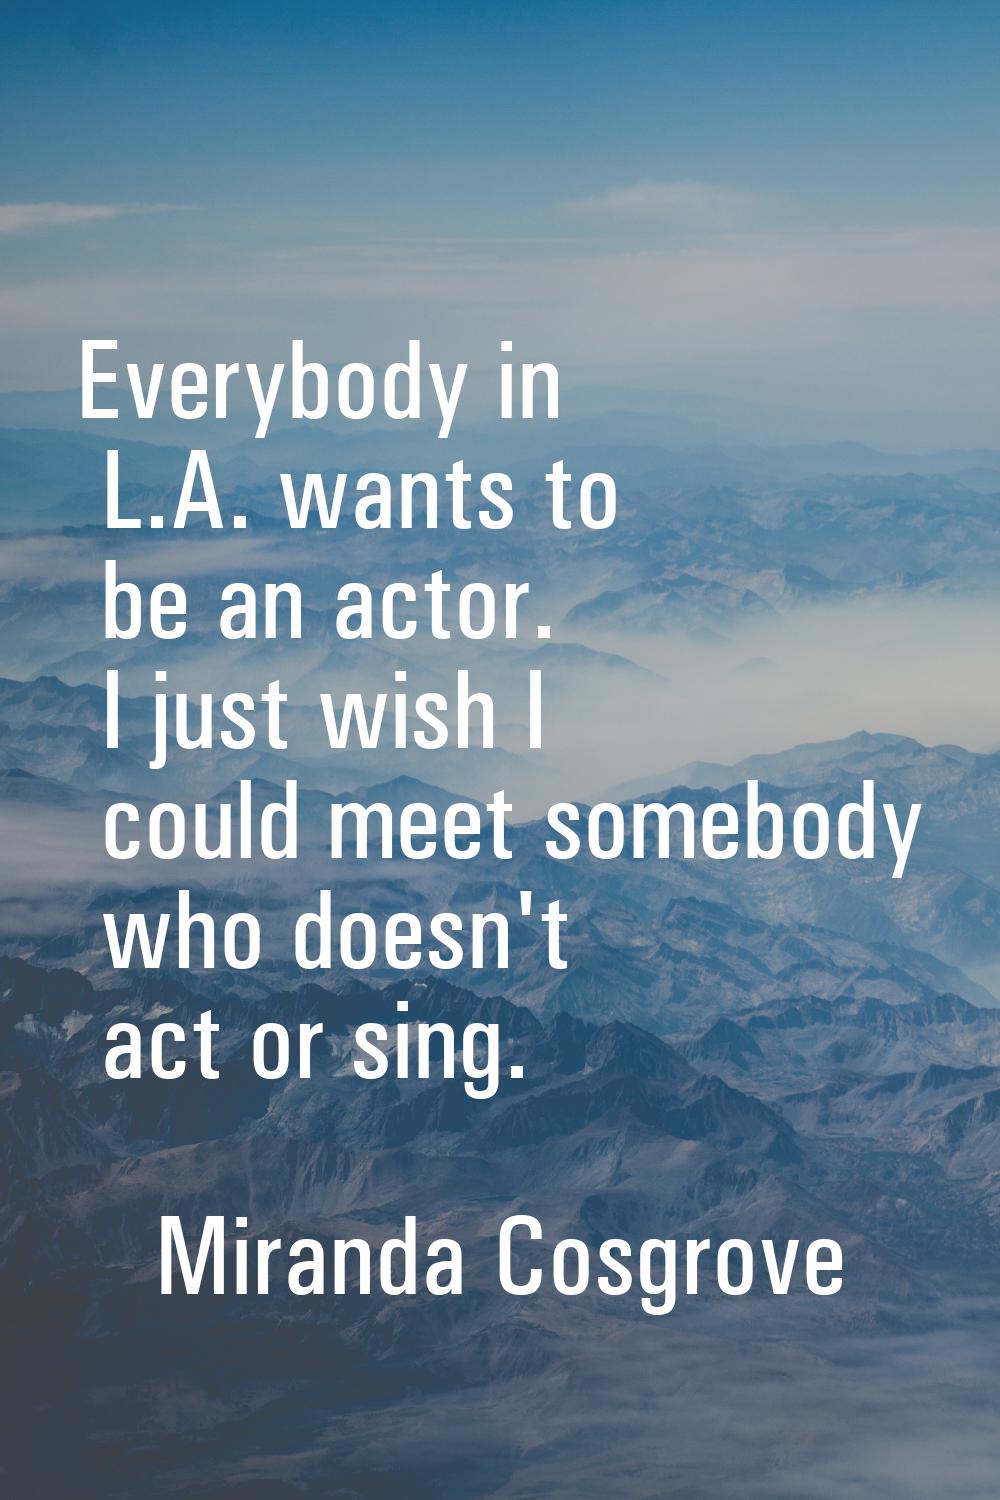 Everybody in L.A. wants to be an actor. I just wish I could meet somebody who doesn't act or sing.